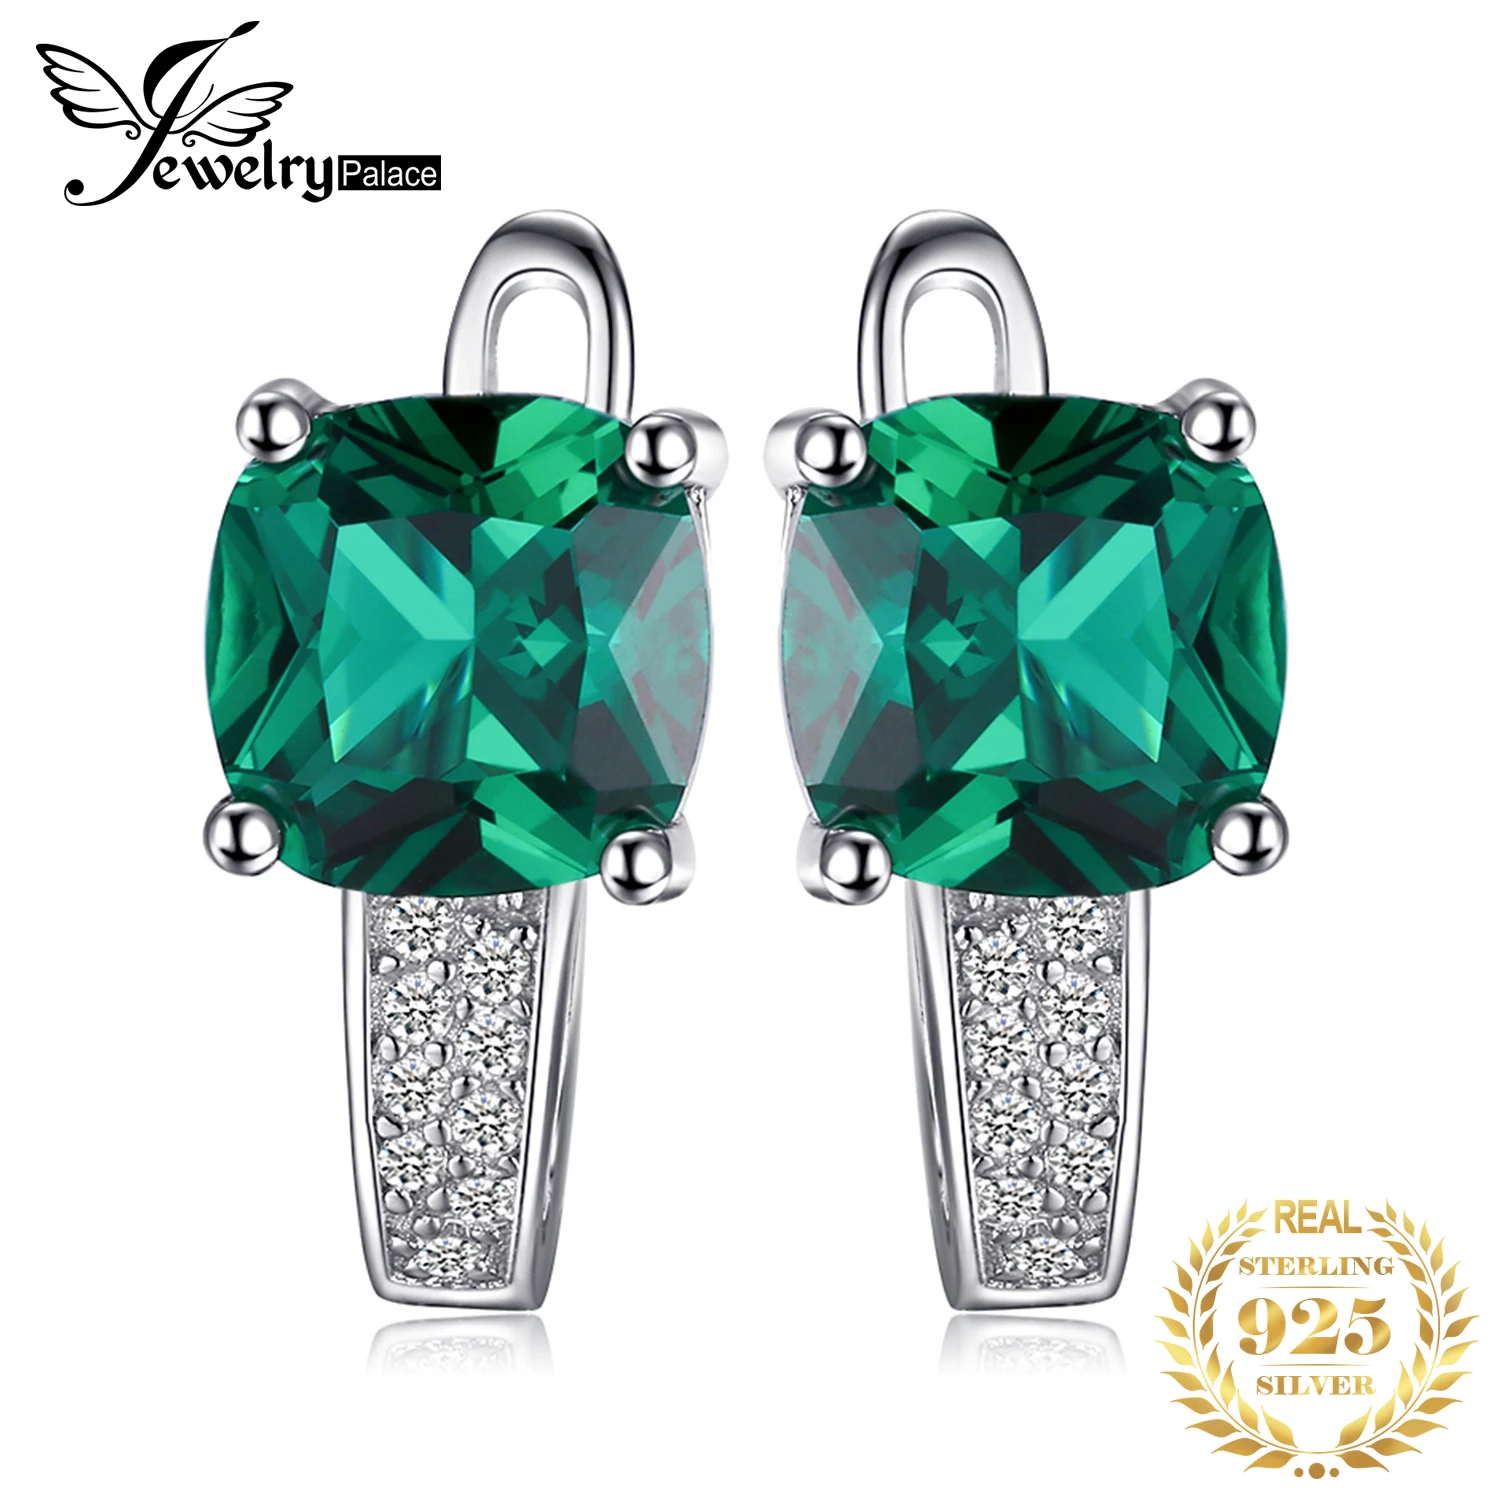 Discount Jewelry Silver Simulated Ruby,Emerald,Sapphire Stylish INDIAN JEWELRY 